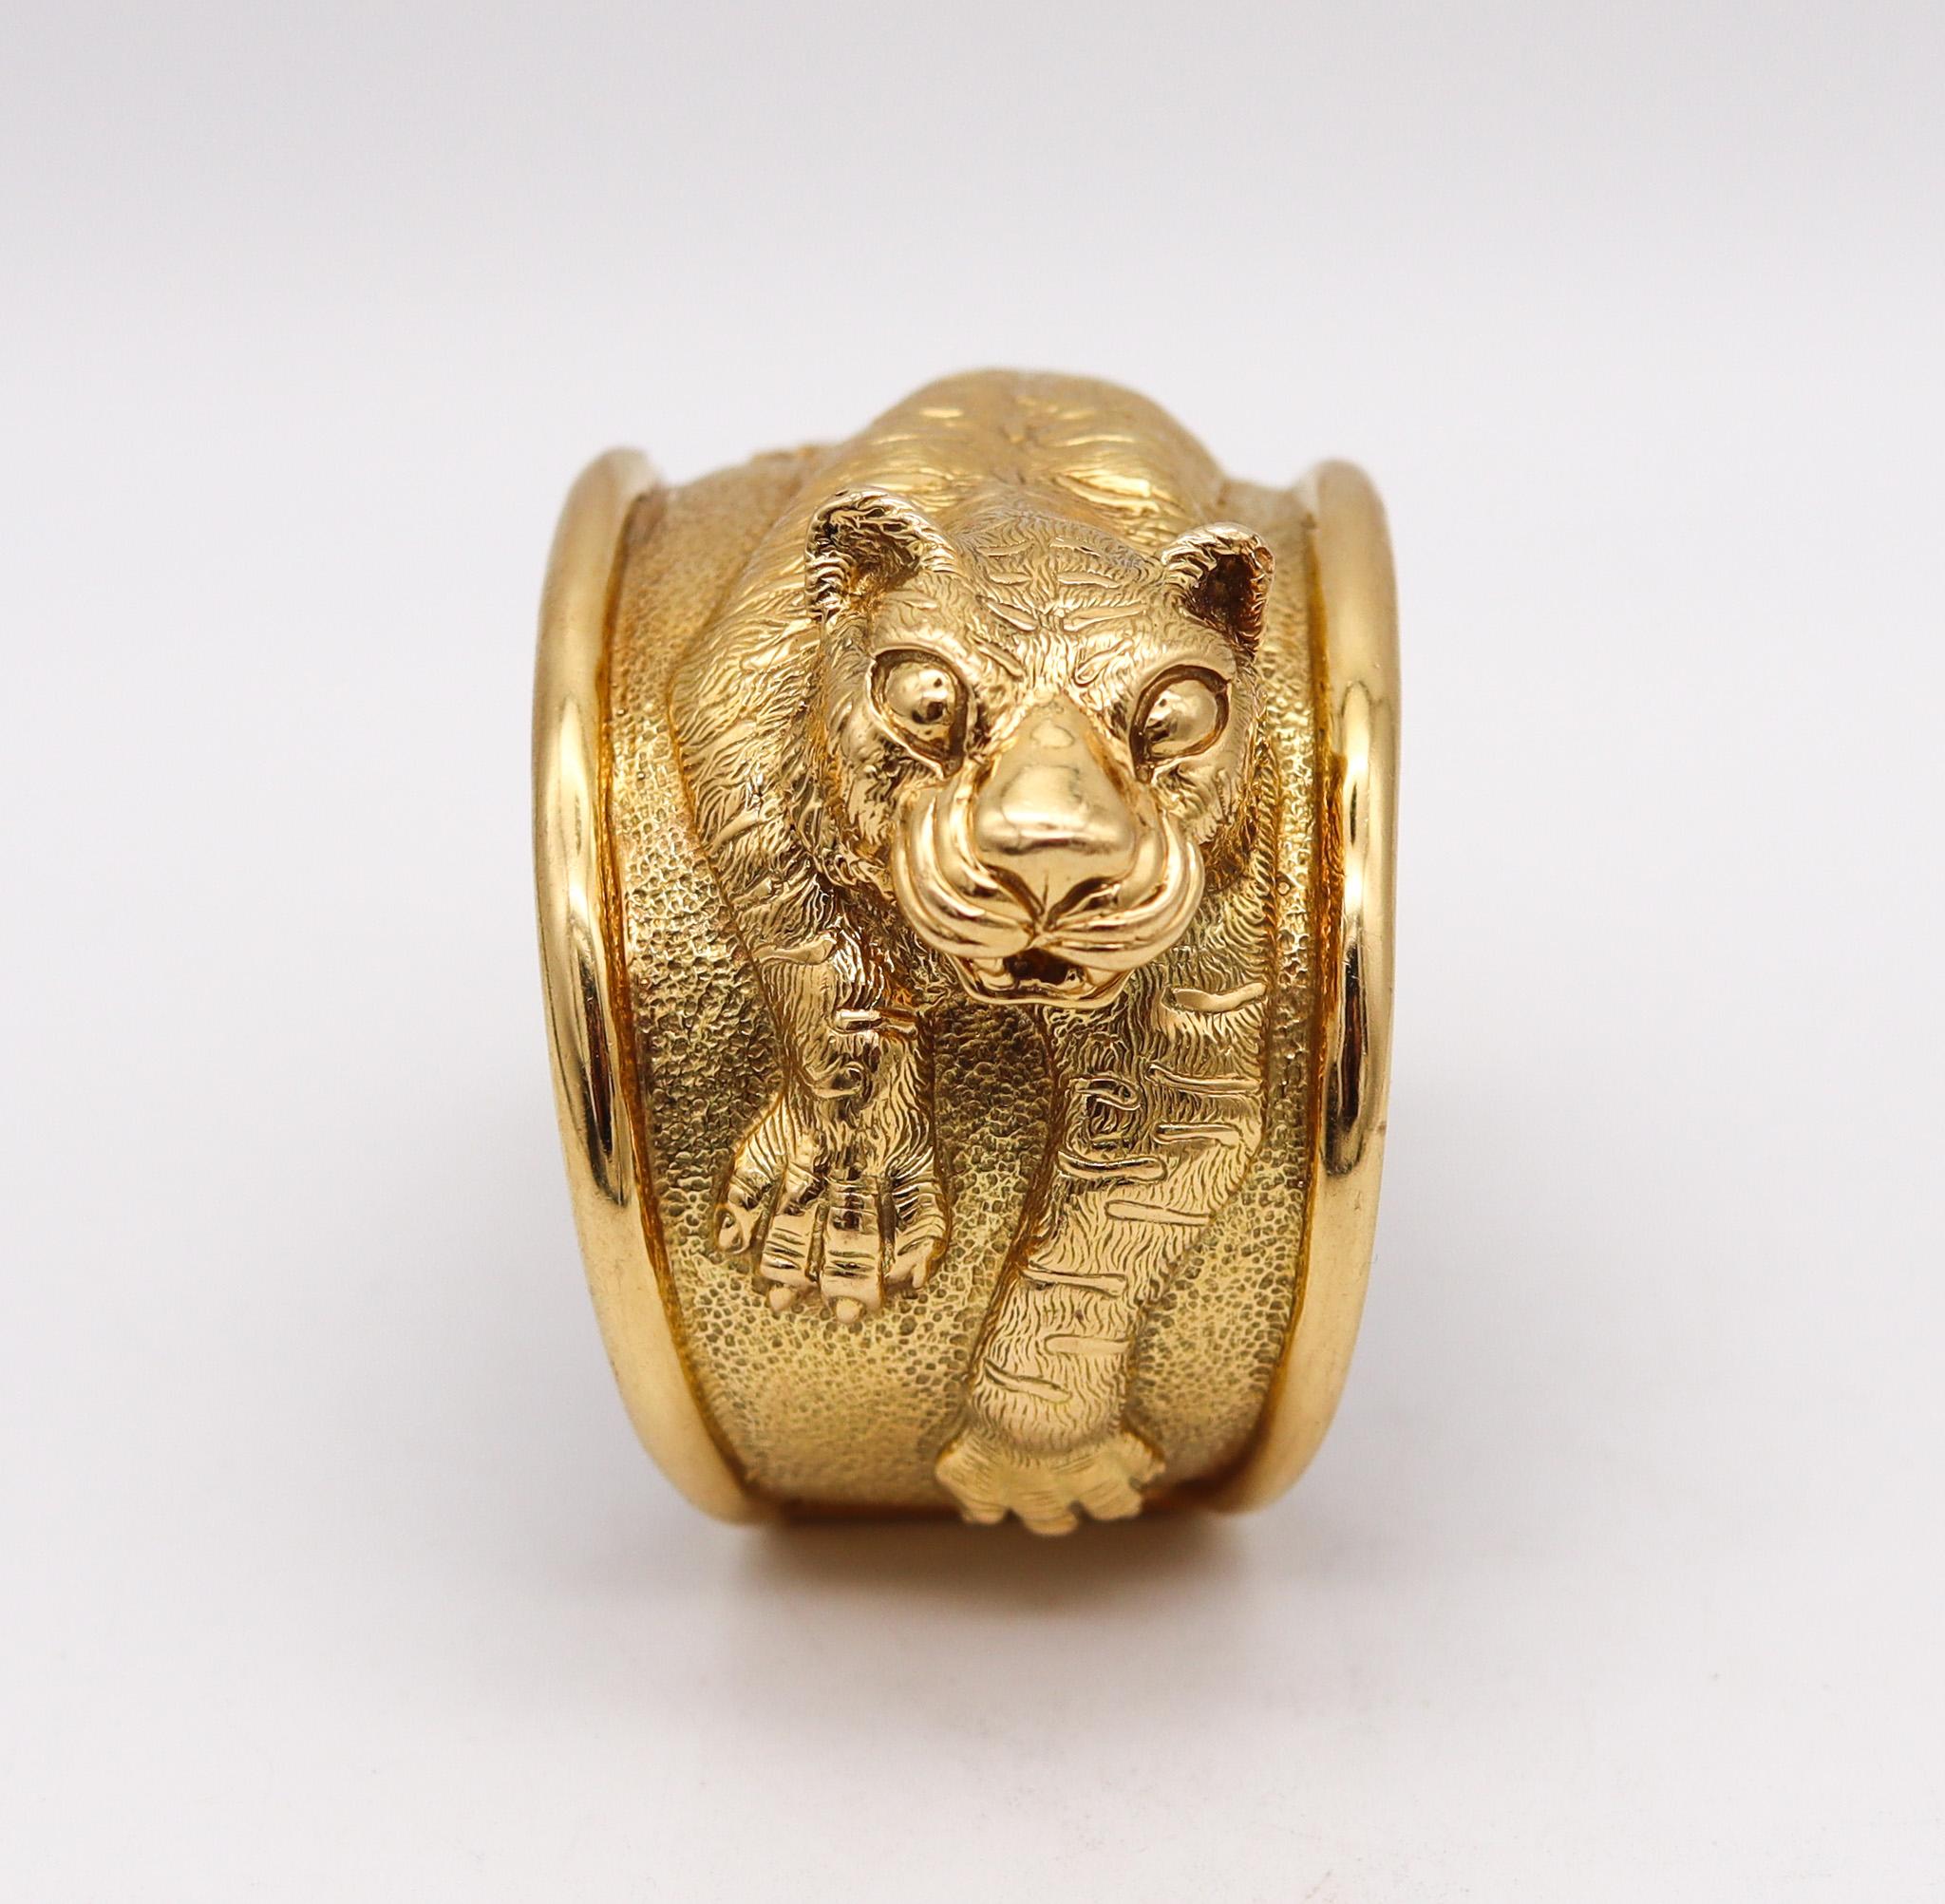 Cuff bracelet designed by Craig Drake (1936-2015).

Gorgeous cuff bracelet, created at the jewelry atelier of renowned fine jewelry designer Craig Drake, back in the 1980's. This cuff has been crafted in the shape of a resting tiger in solid yellow